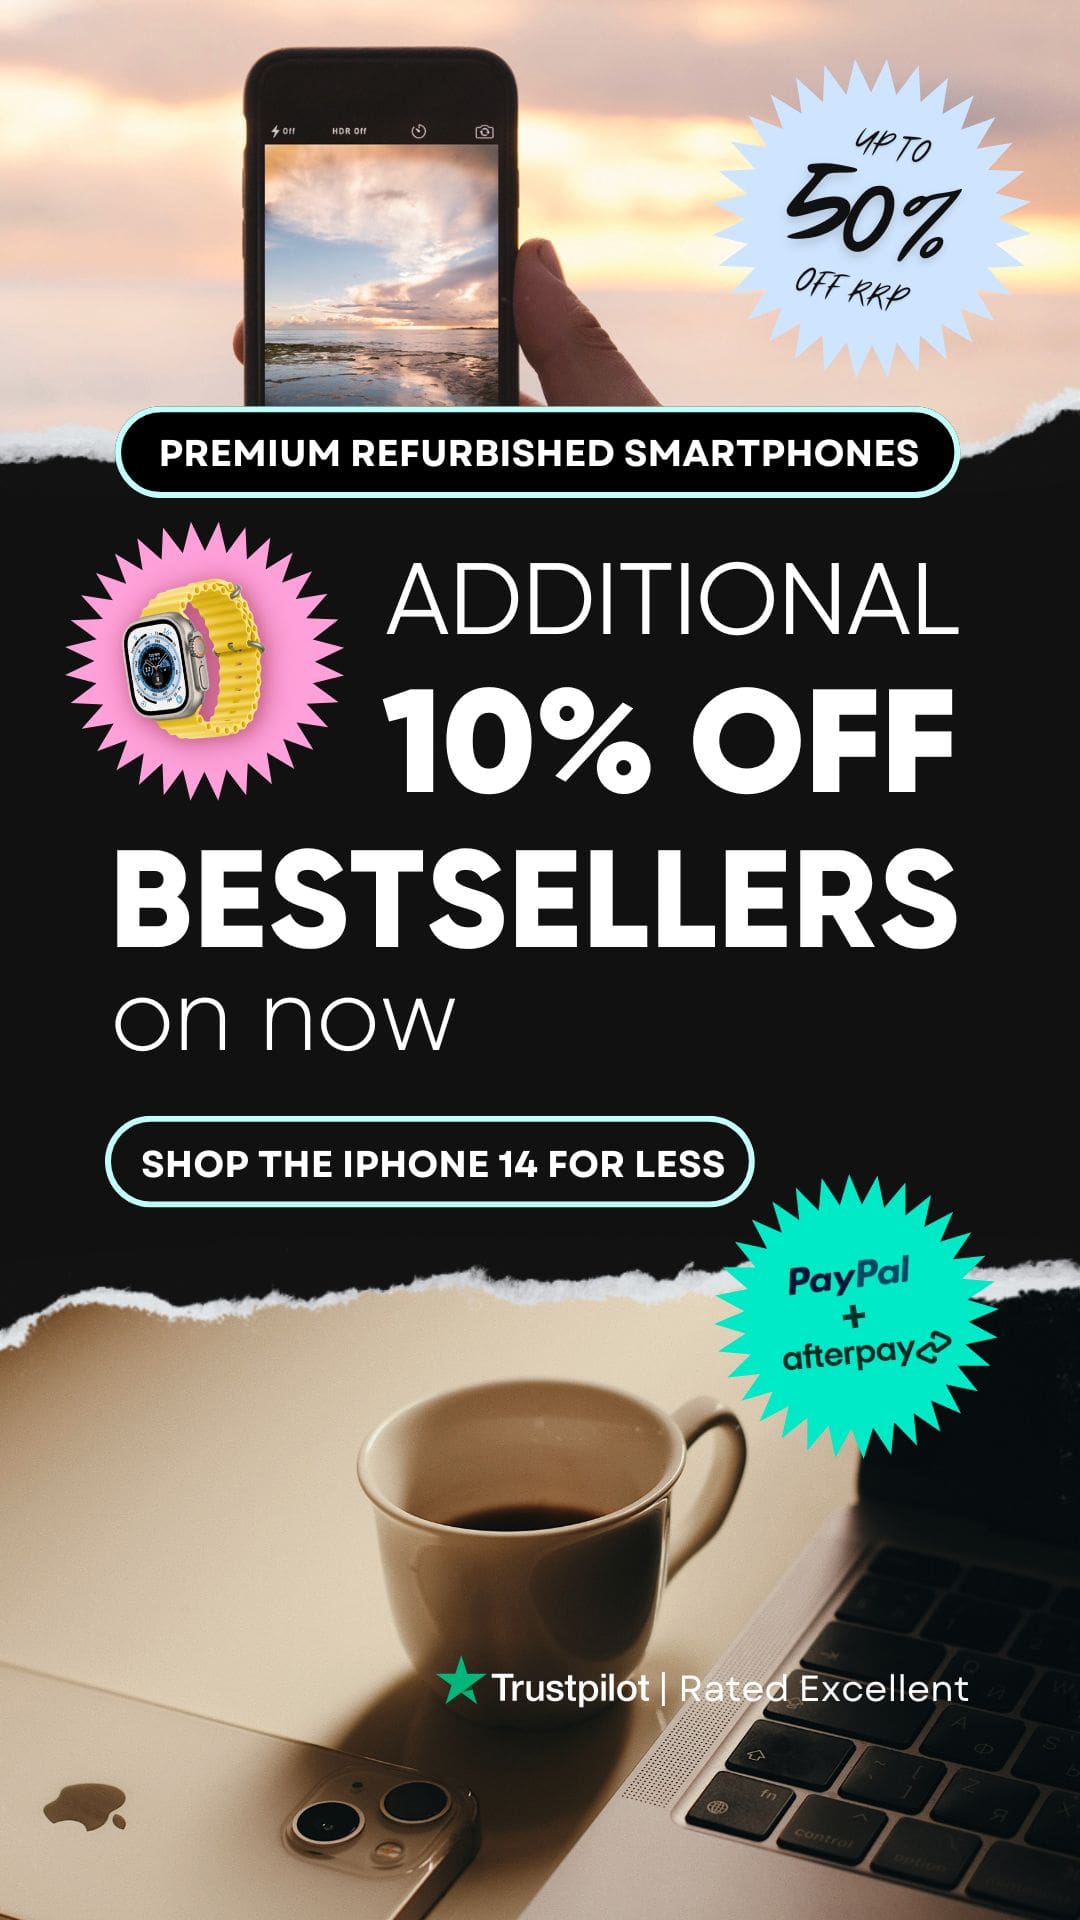 Refurbished iPhones | 10% off Bestsellers in May with Frank Mobile